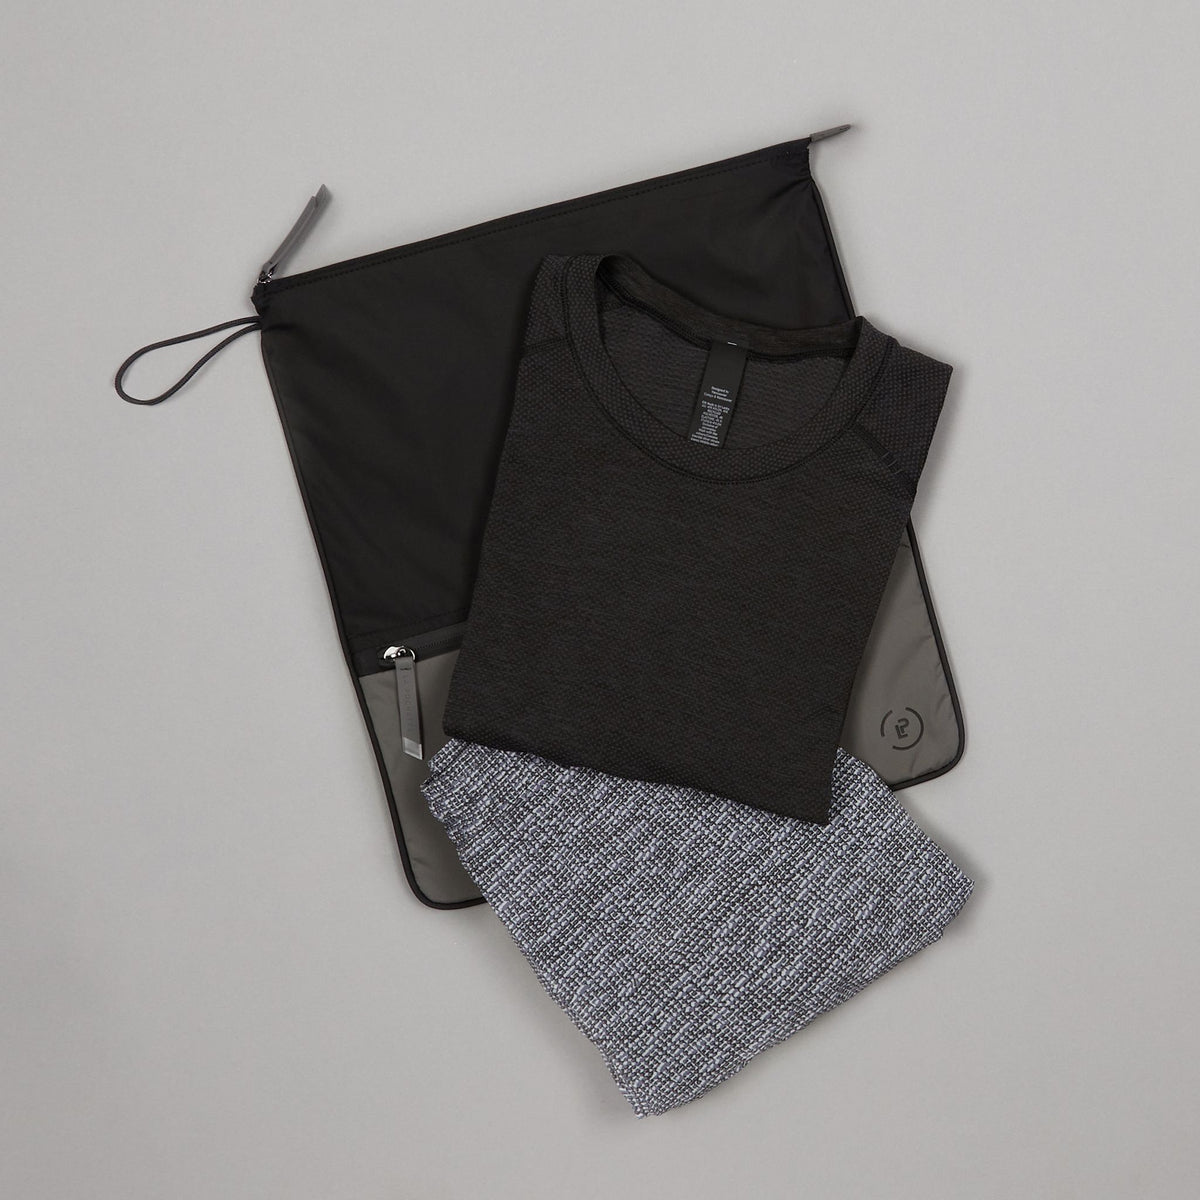 Ink Pewter Sweat Bag shown flat, with folded gym clothes